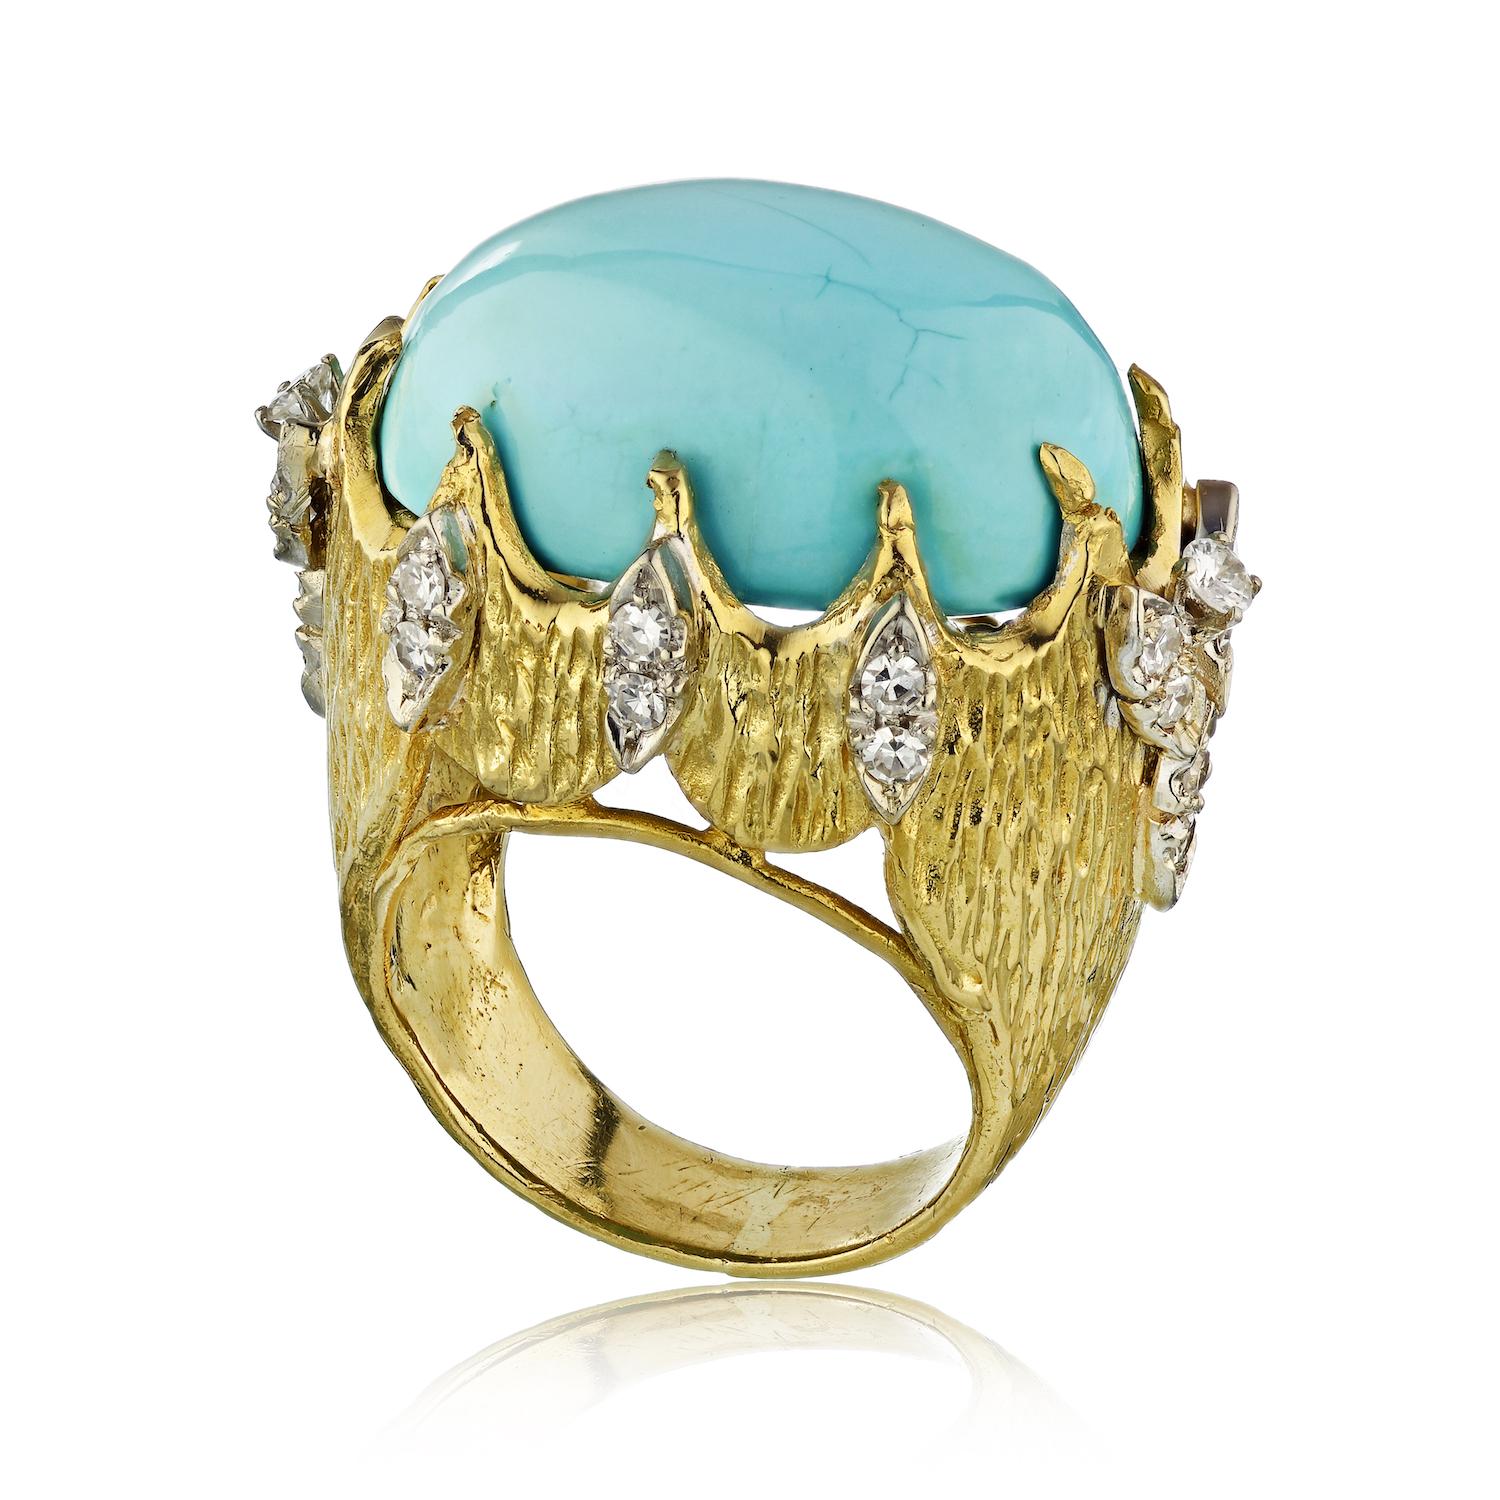 Beautiful 1970's ring crafted in 18k yellow gold set with dome oval turquoise gem. 
26 diamonds on the outer frame.

Gems: Turquoise, Diamonds
Metal Type: 18K Yellow Gold
Metal Weight: 21.0 gr.

Ring Size 6.5

ABOUT TURQUOISE:
Turquoise is an